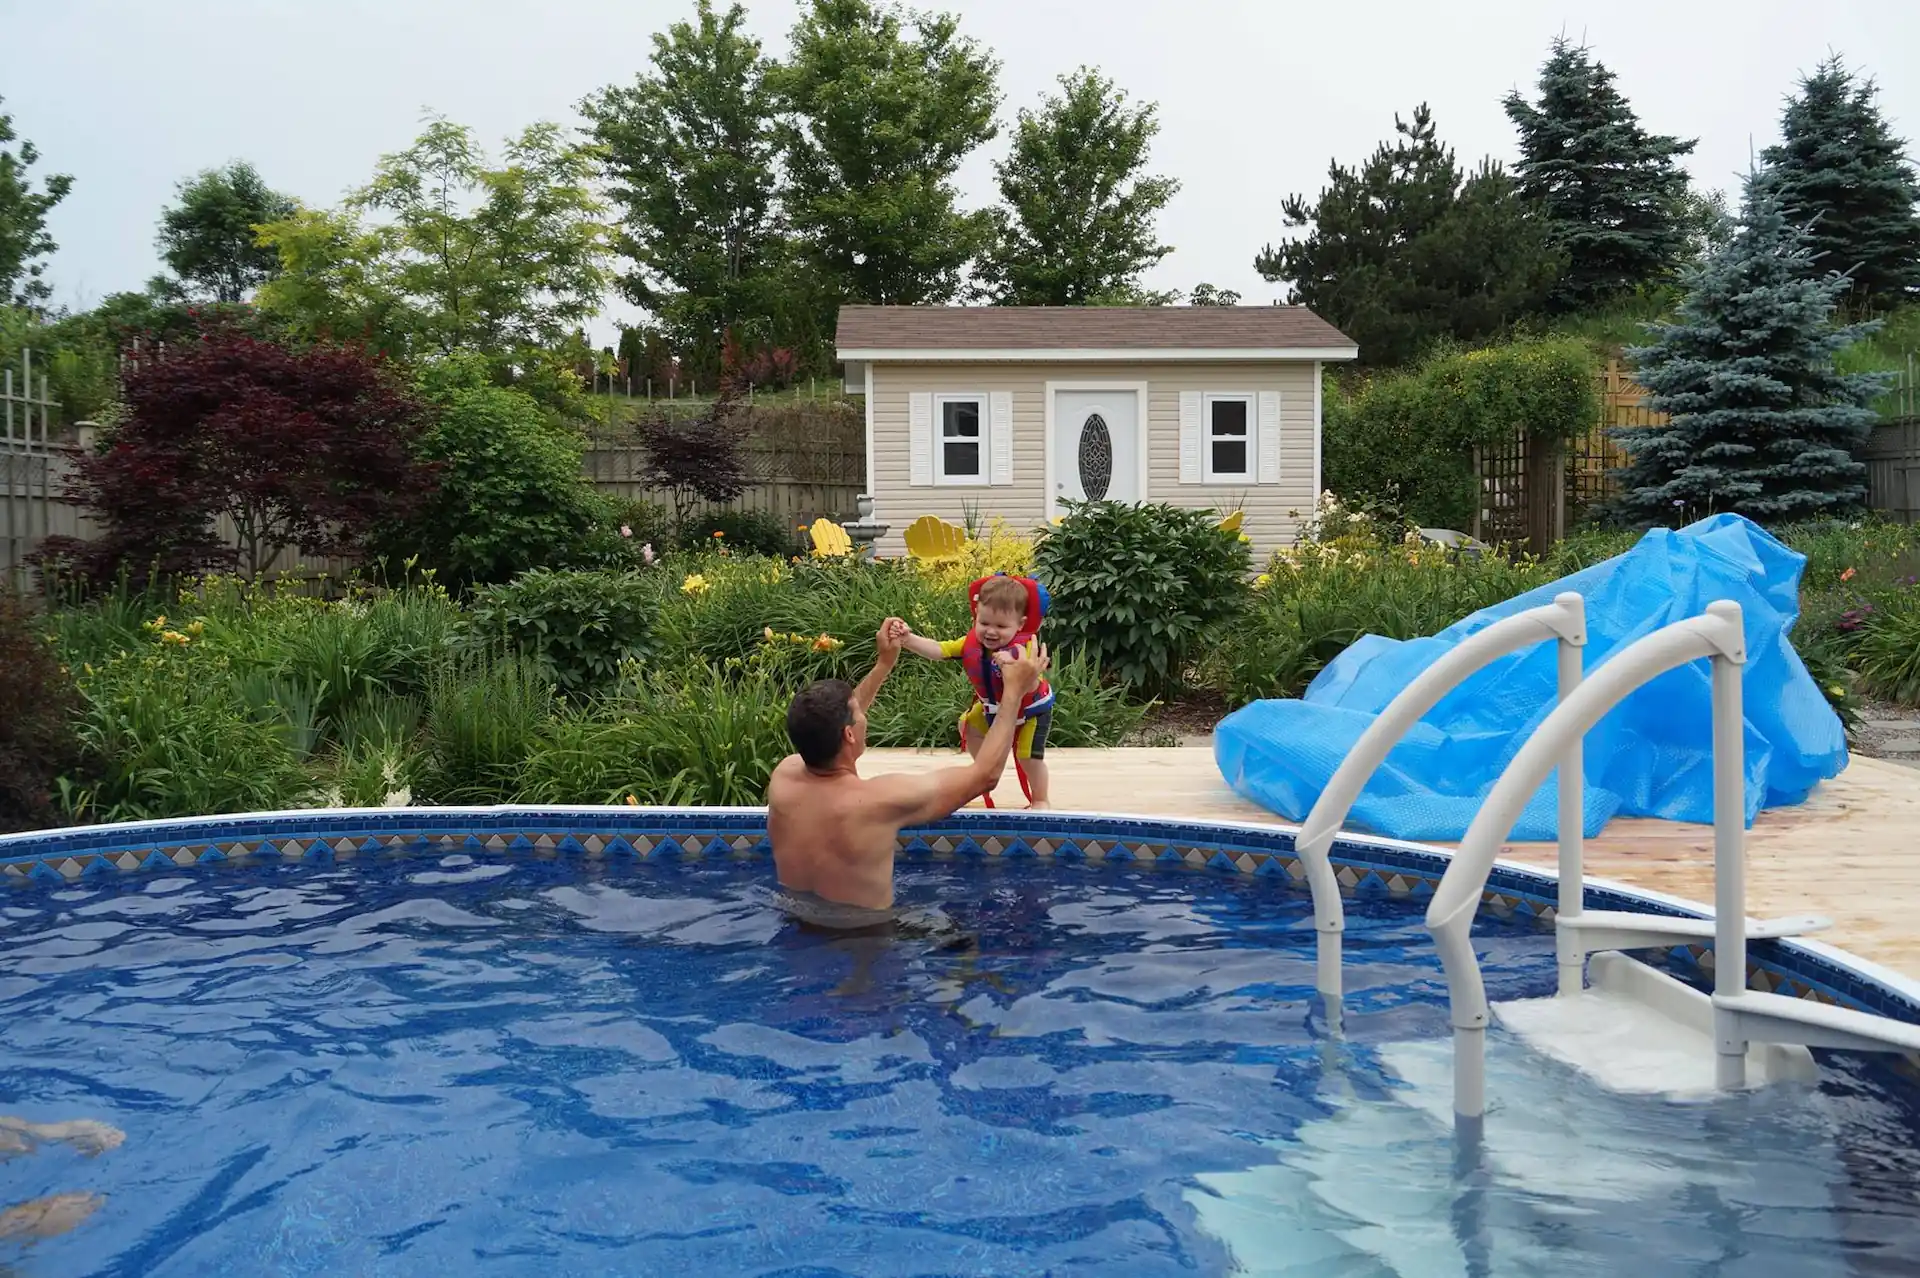 An Above Ground Pool: The Win-Win for Families with Small Children